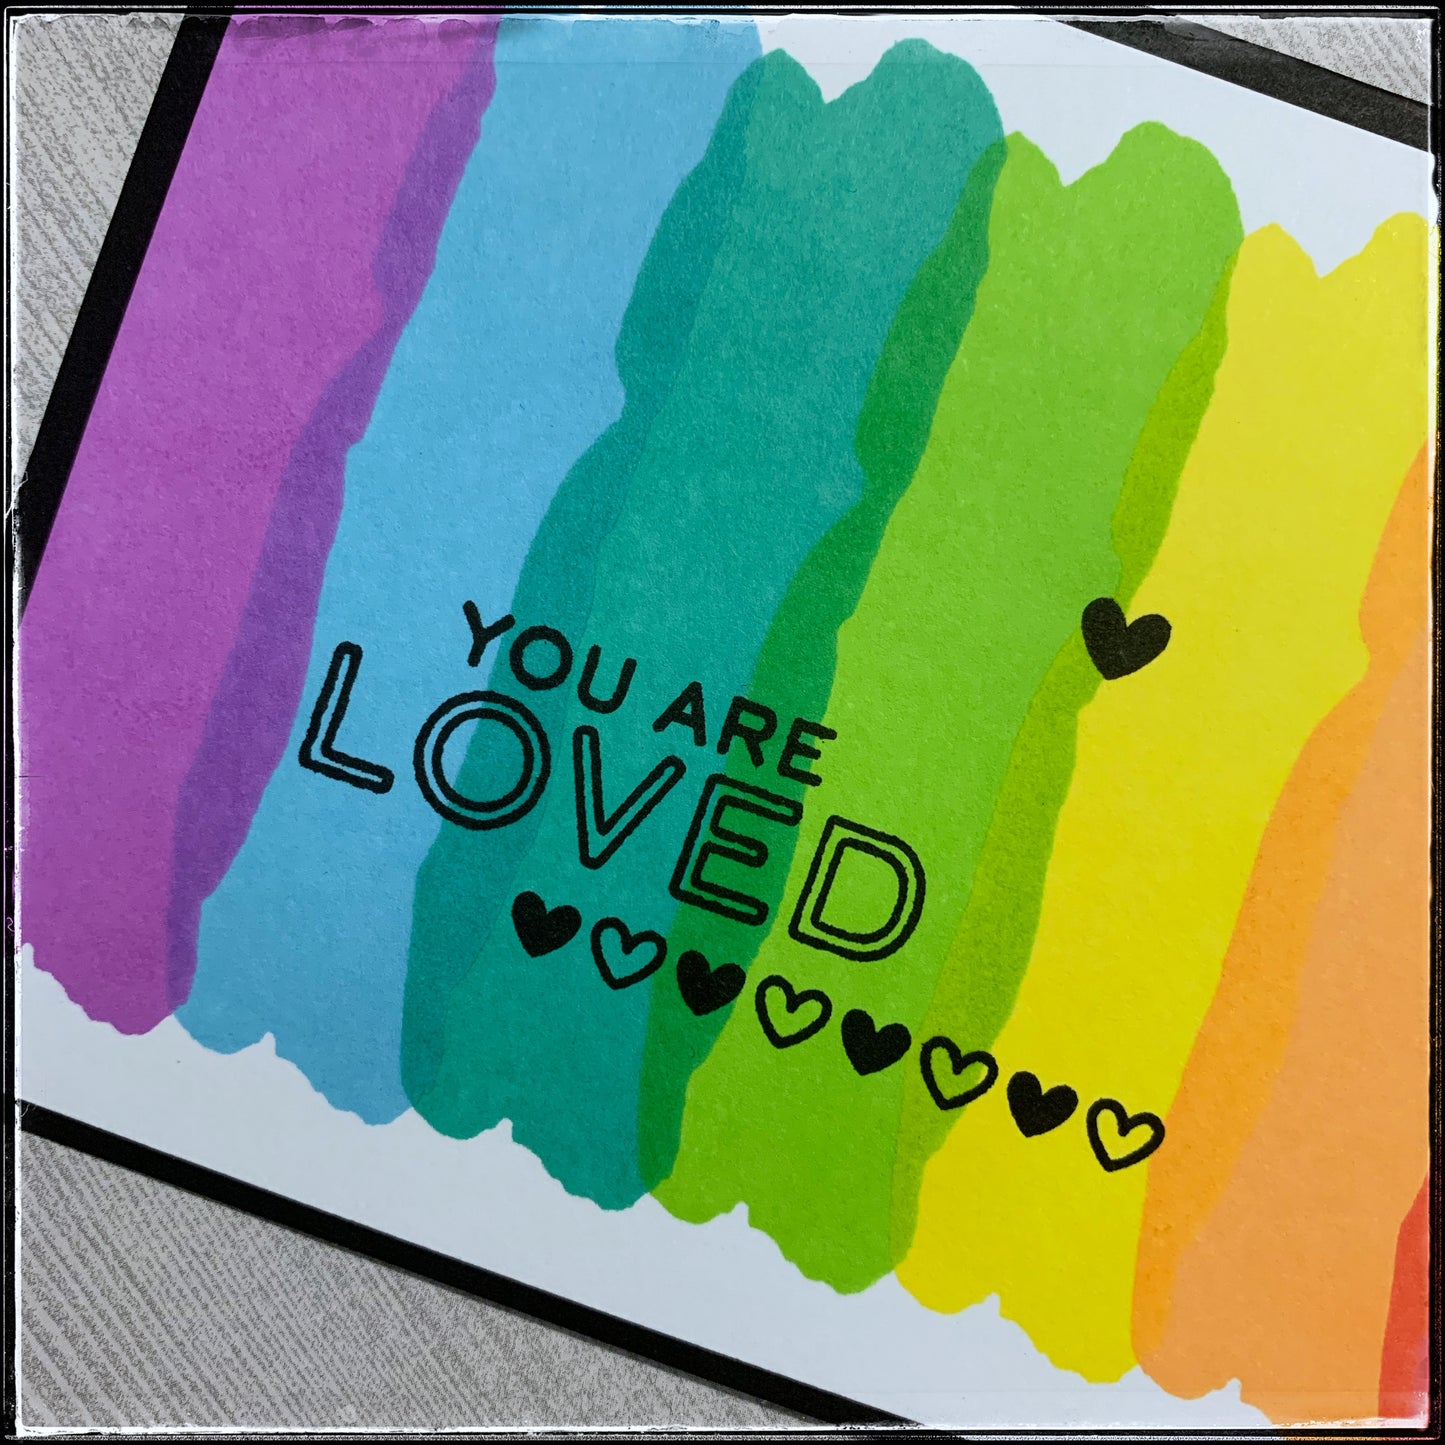 You Are Loved [Rainbow]